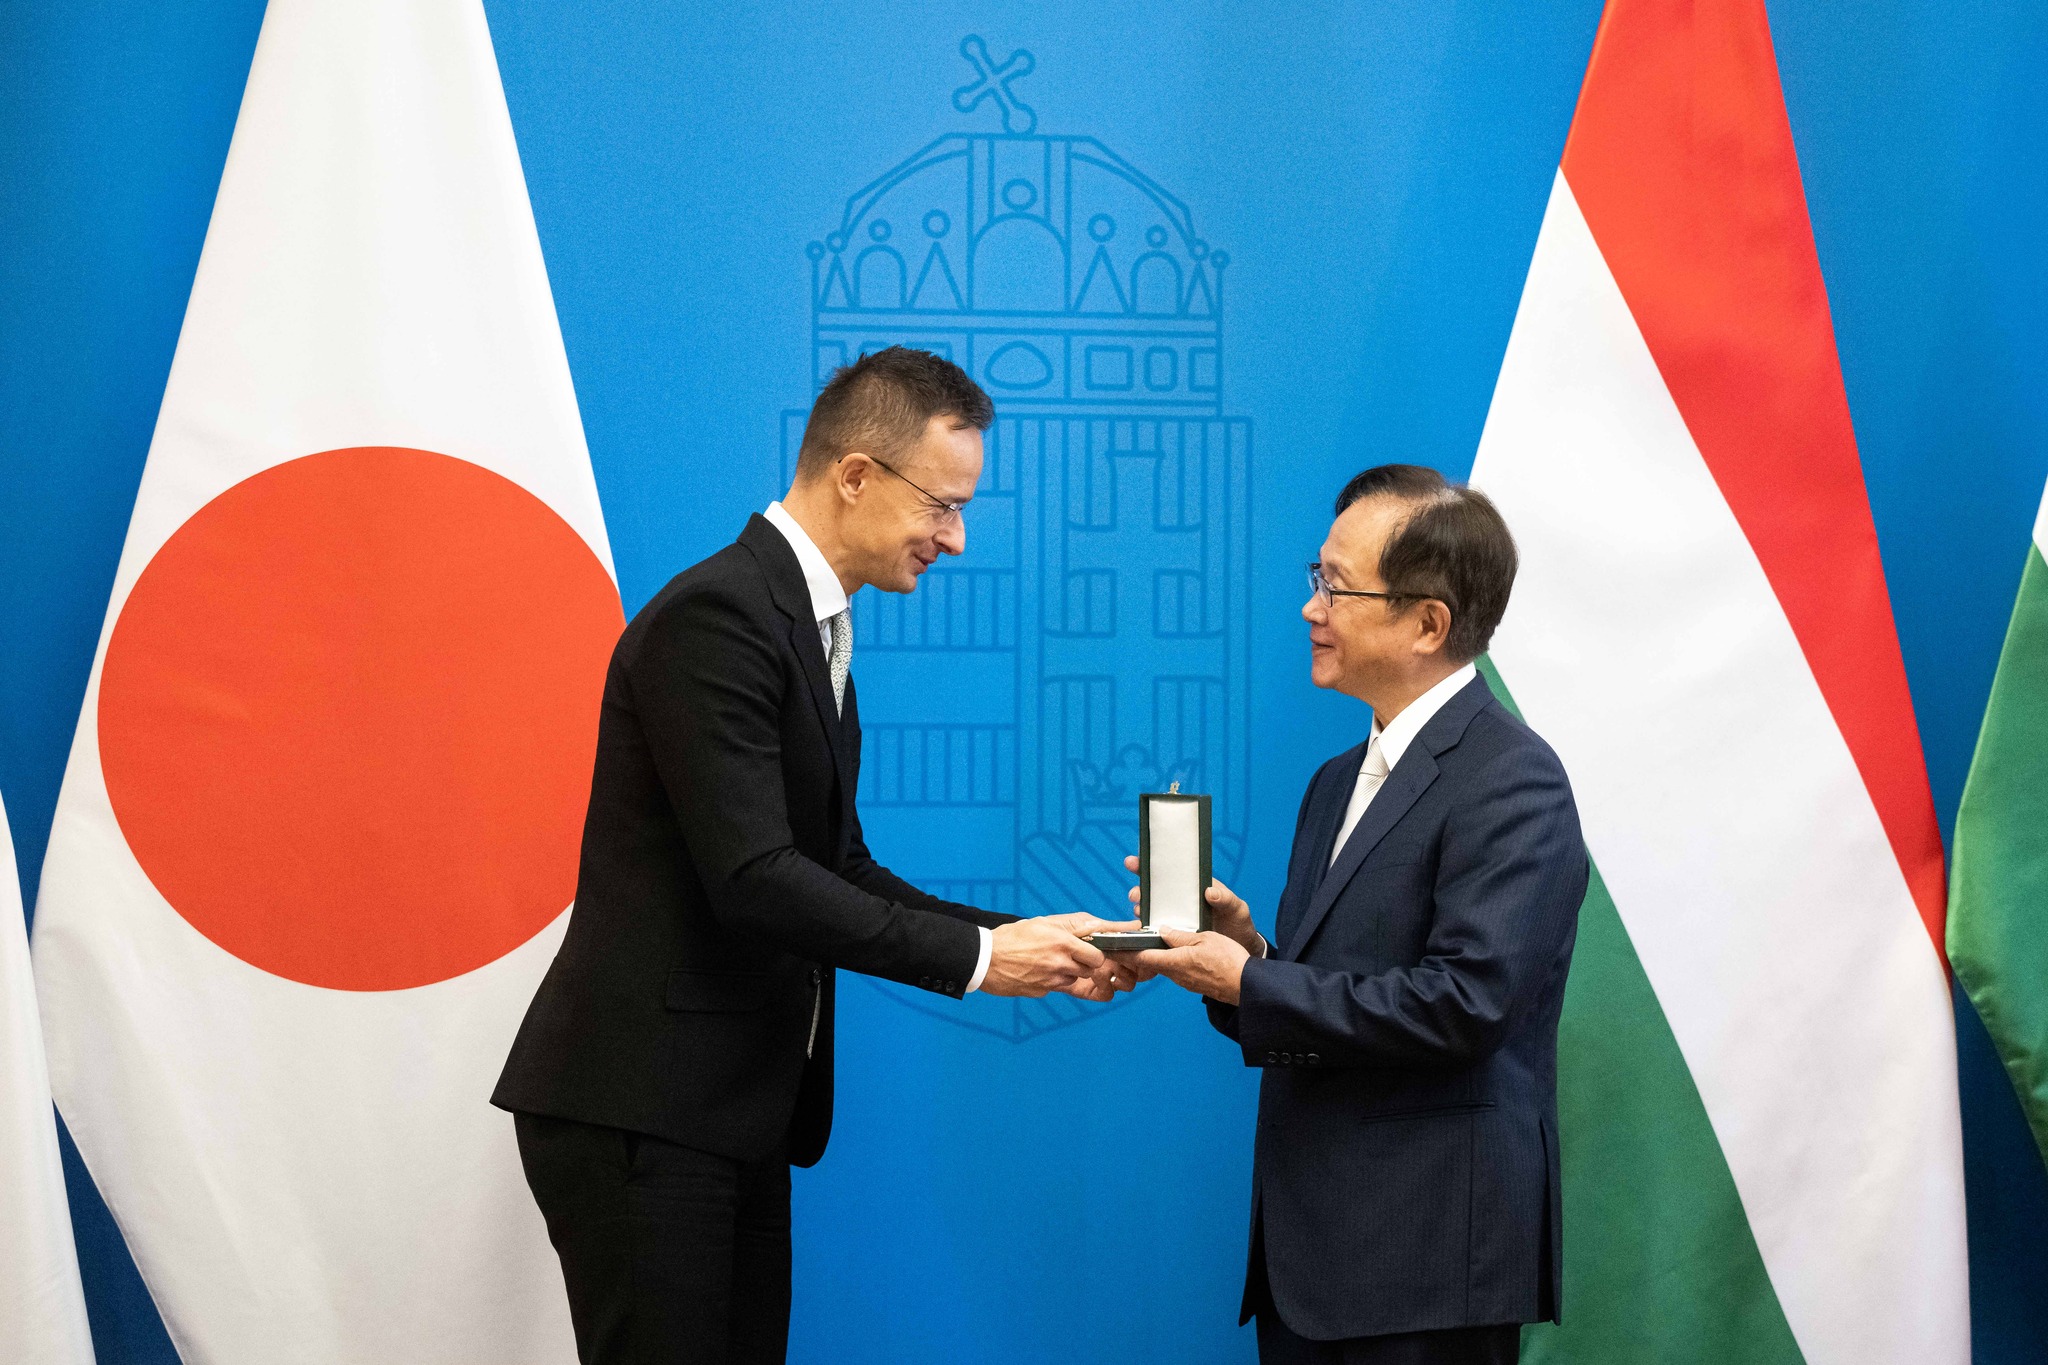 Japanese Business Federation Leader Decorated in Budapest